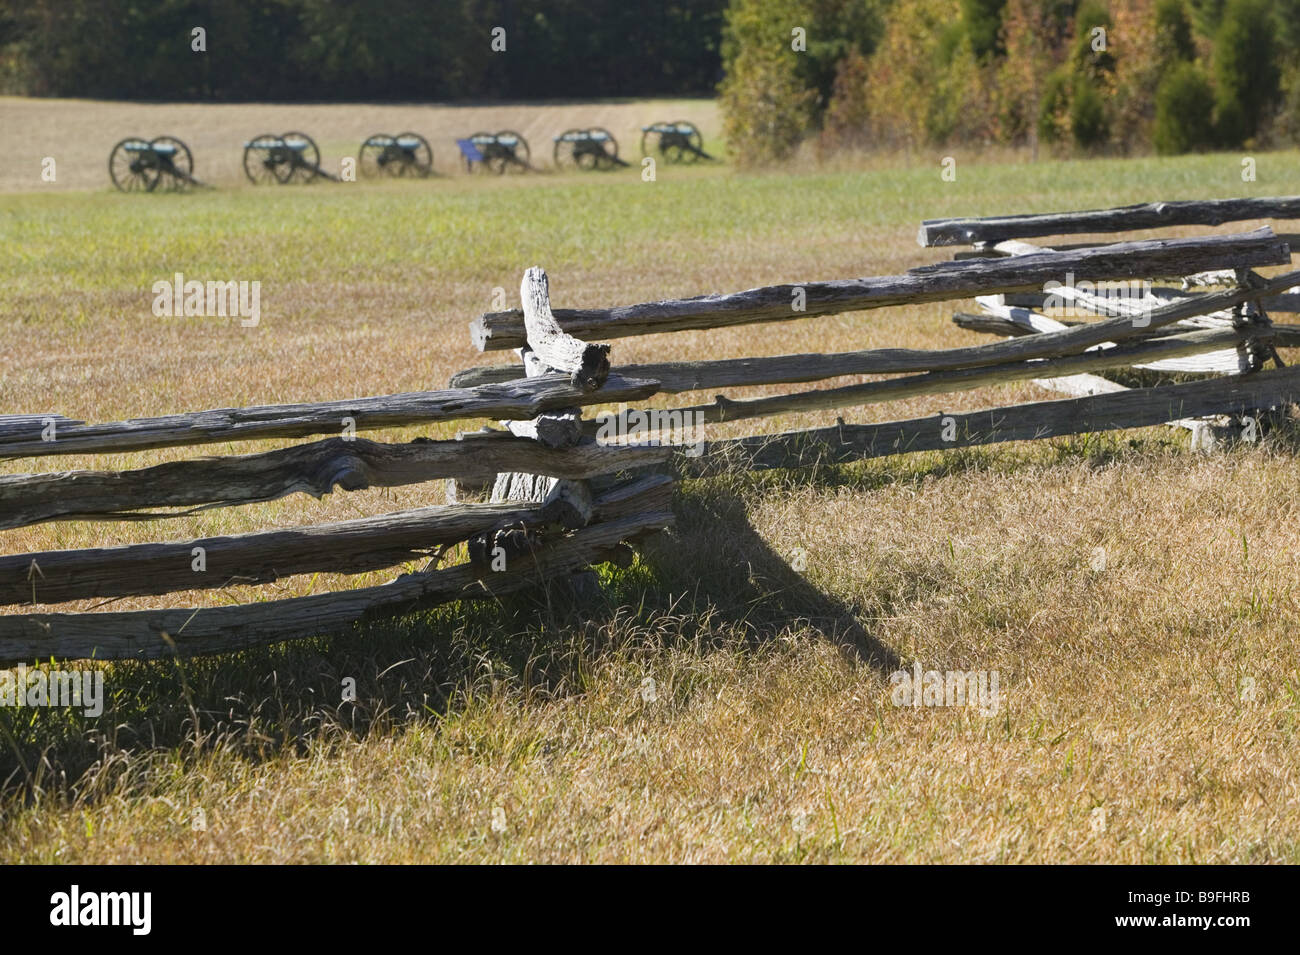 usa Tennessee Shiloh battlefield fence cannons museum America civil war field firearm history army obstacle historically wood Stock Photo